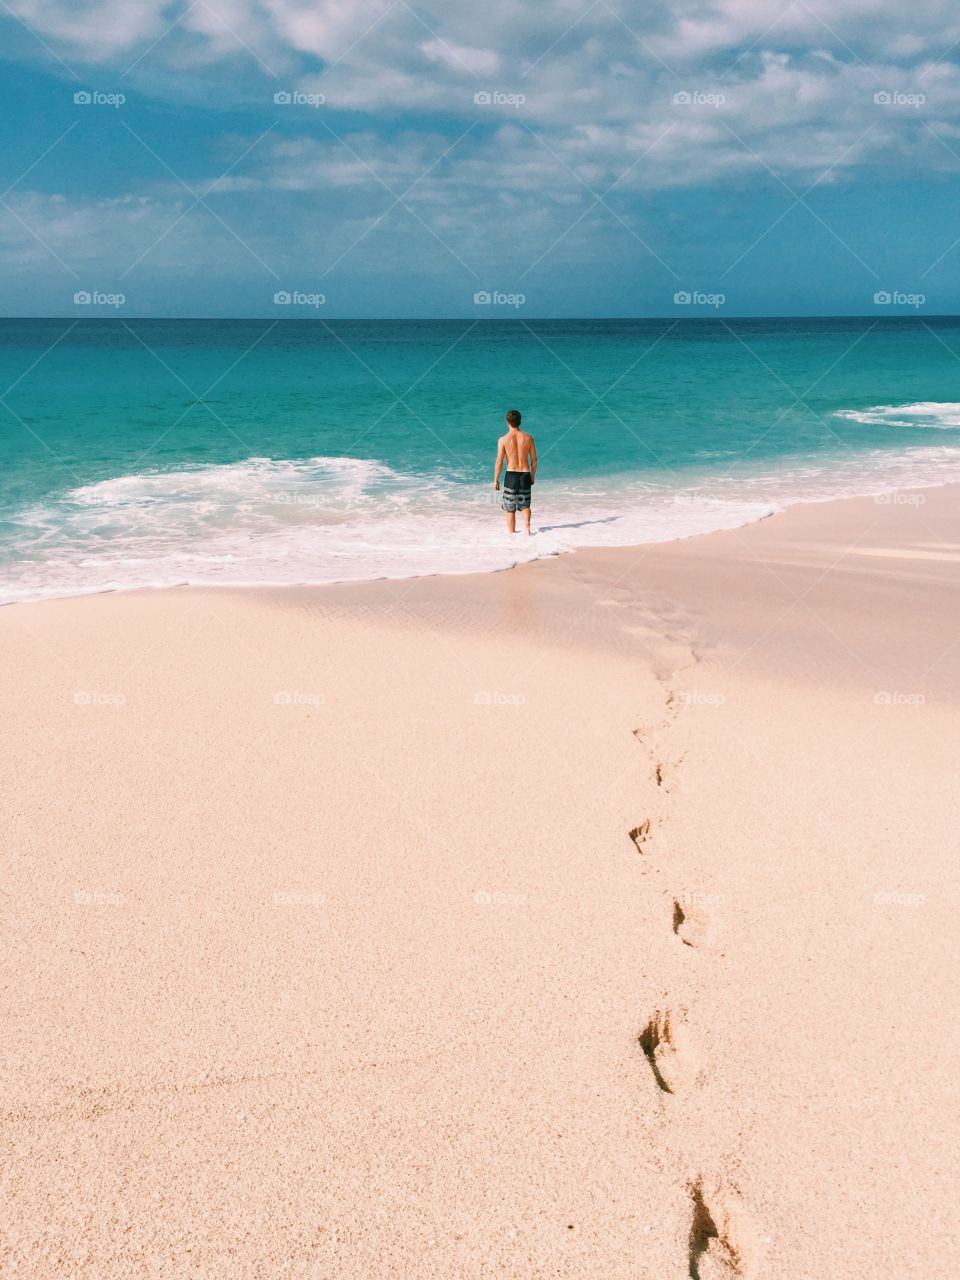 Man entering the beach on the north shore of Oahu.